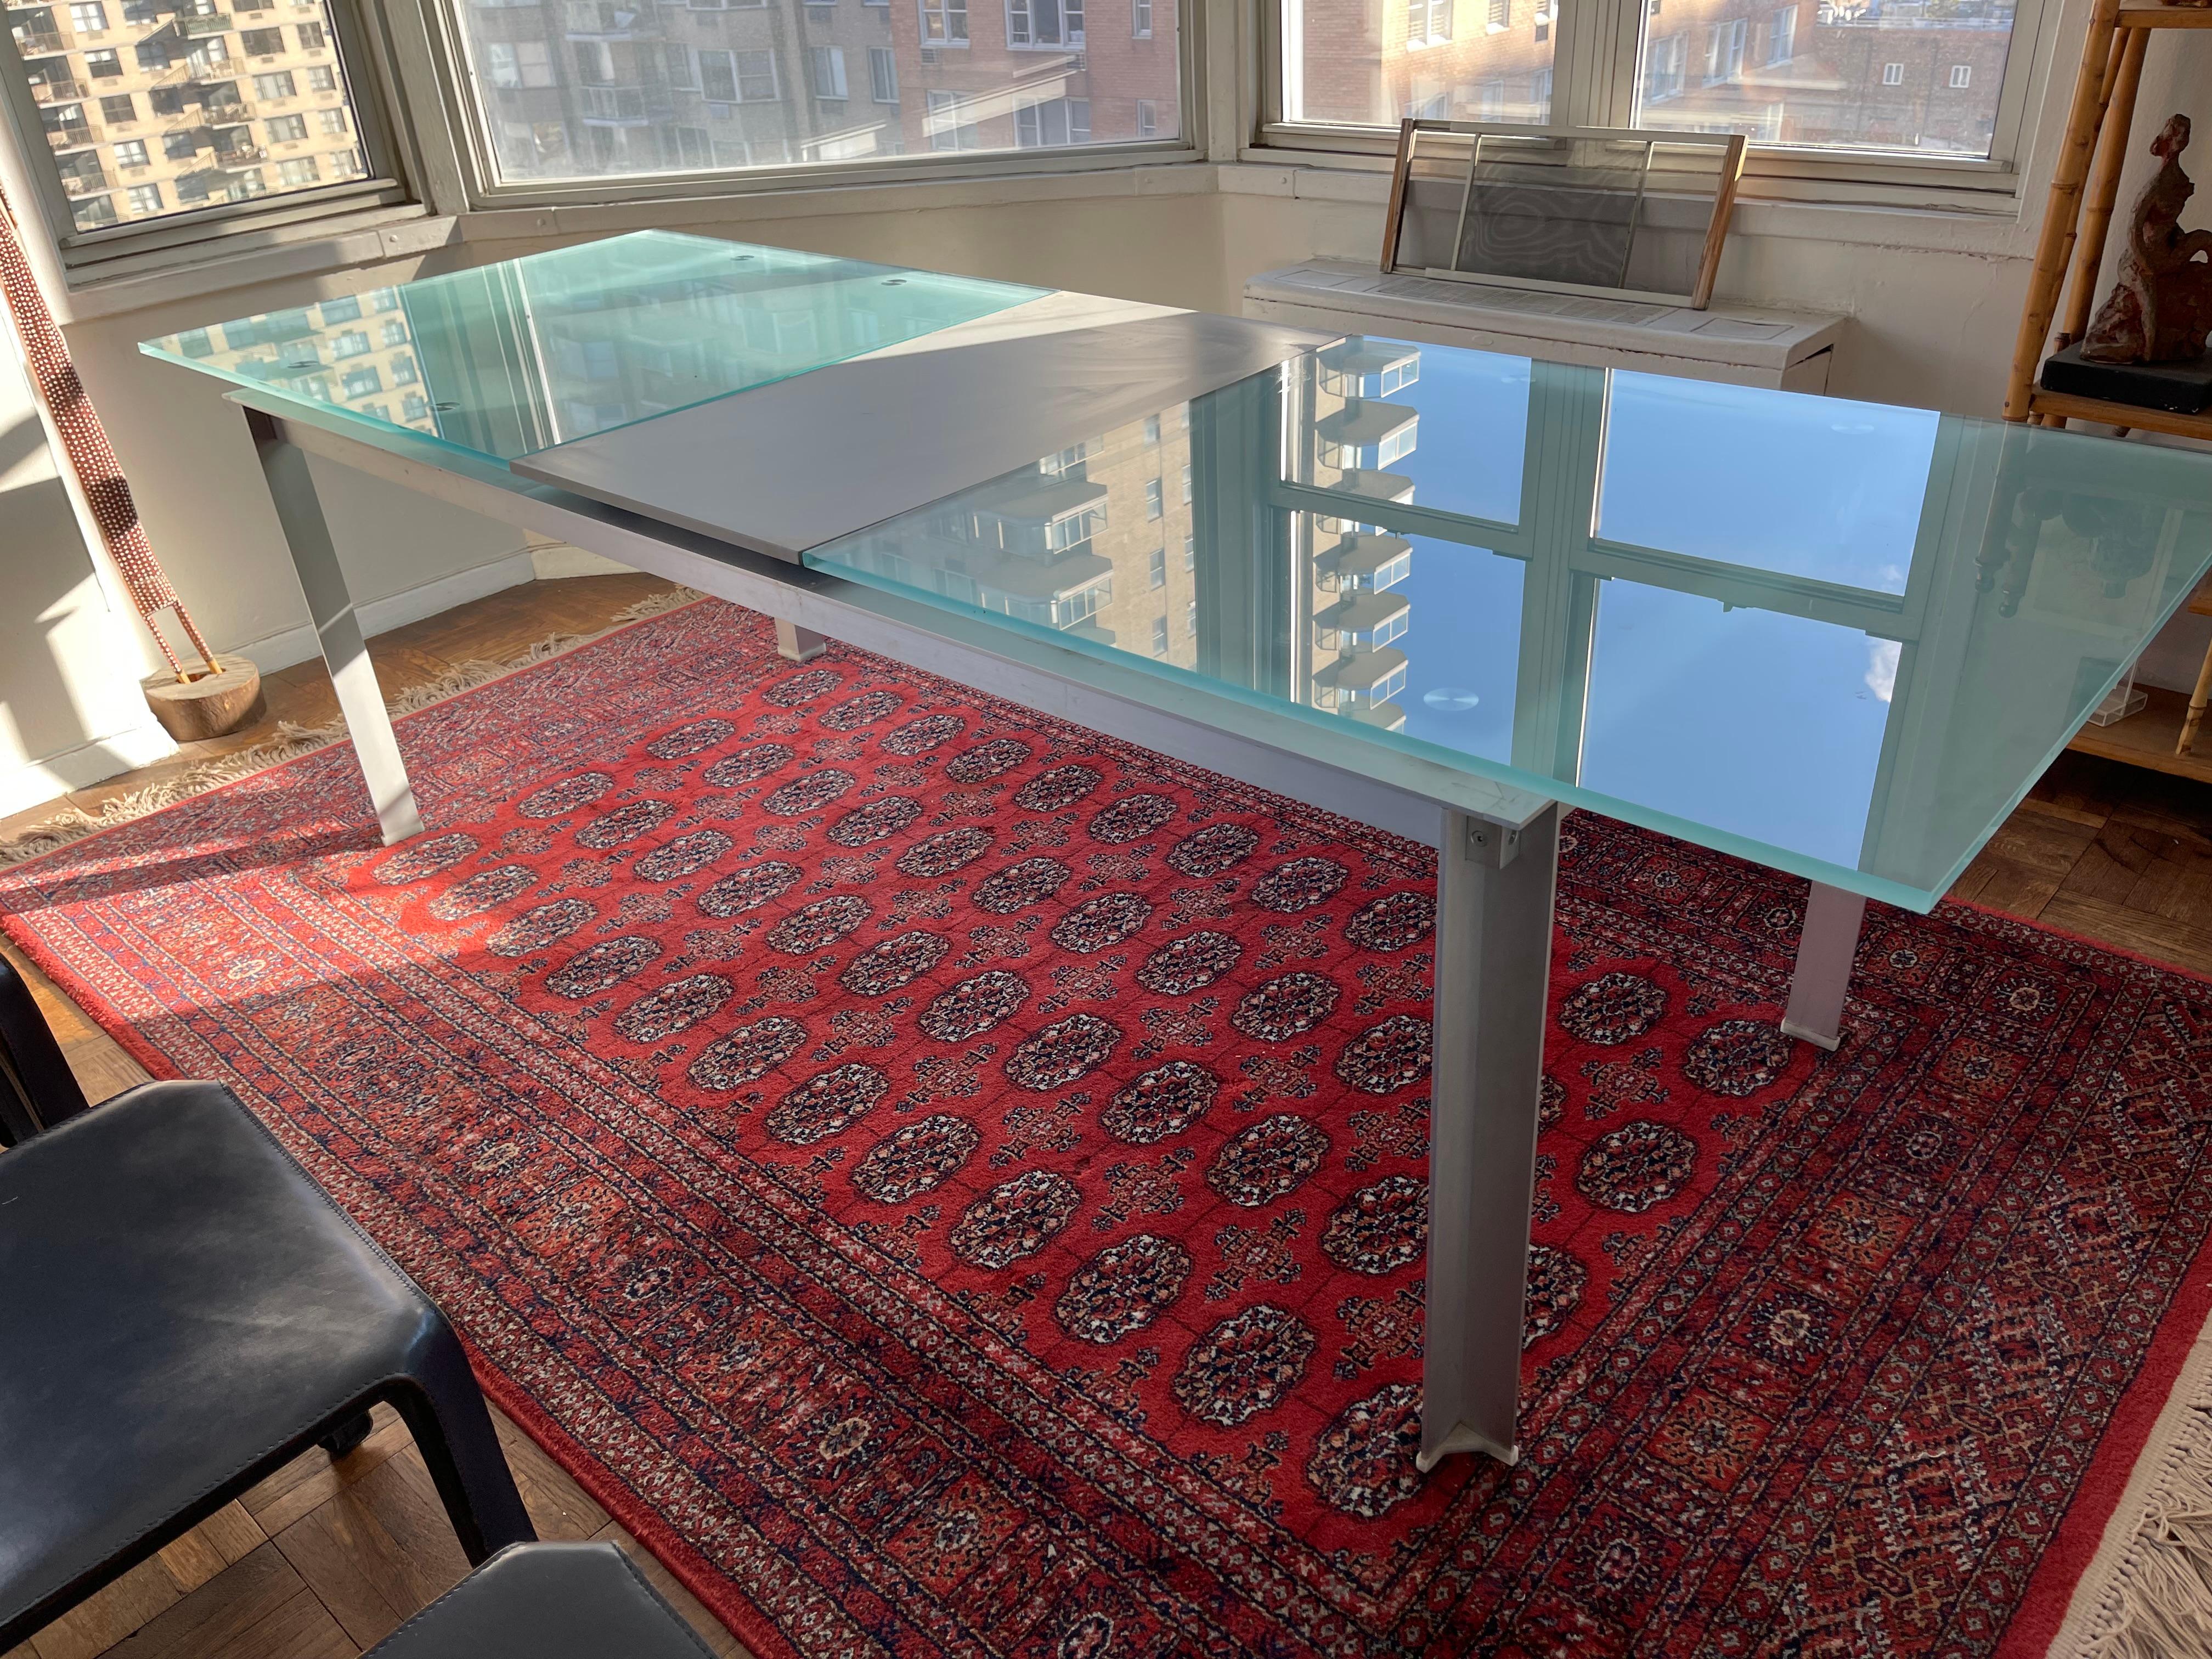 Piva Aluminum & Glass Expandable Dining Table Atavola 20th Century Contemporary In Excellent Condition For Sale In East Hampton, NY